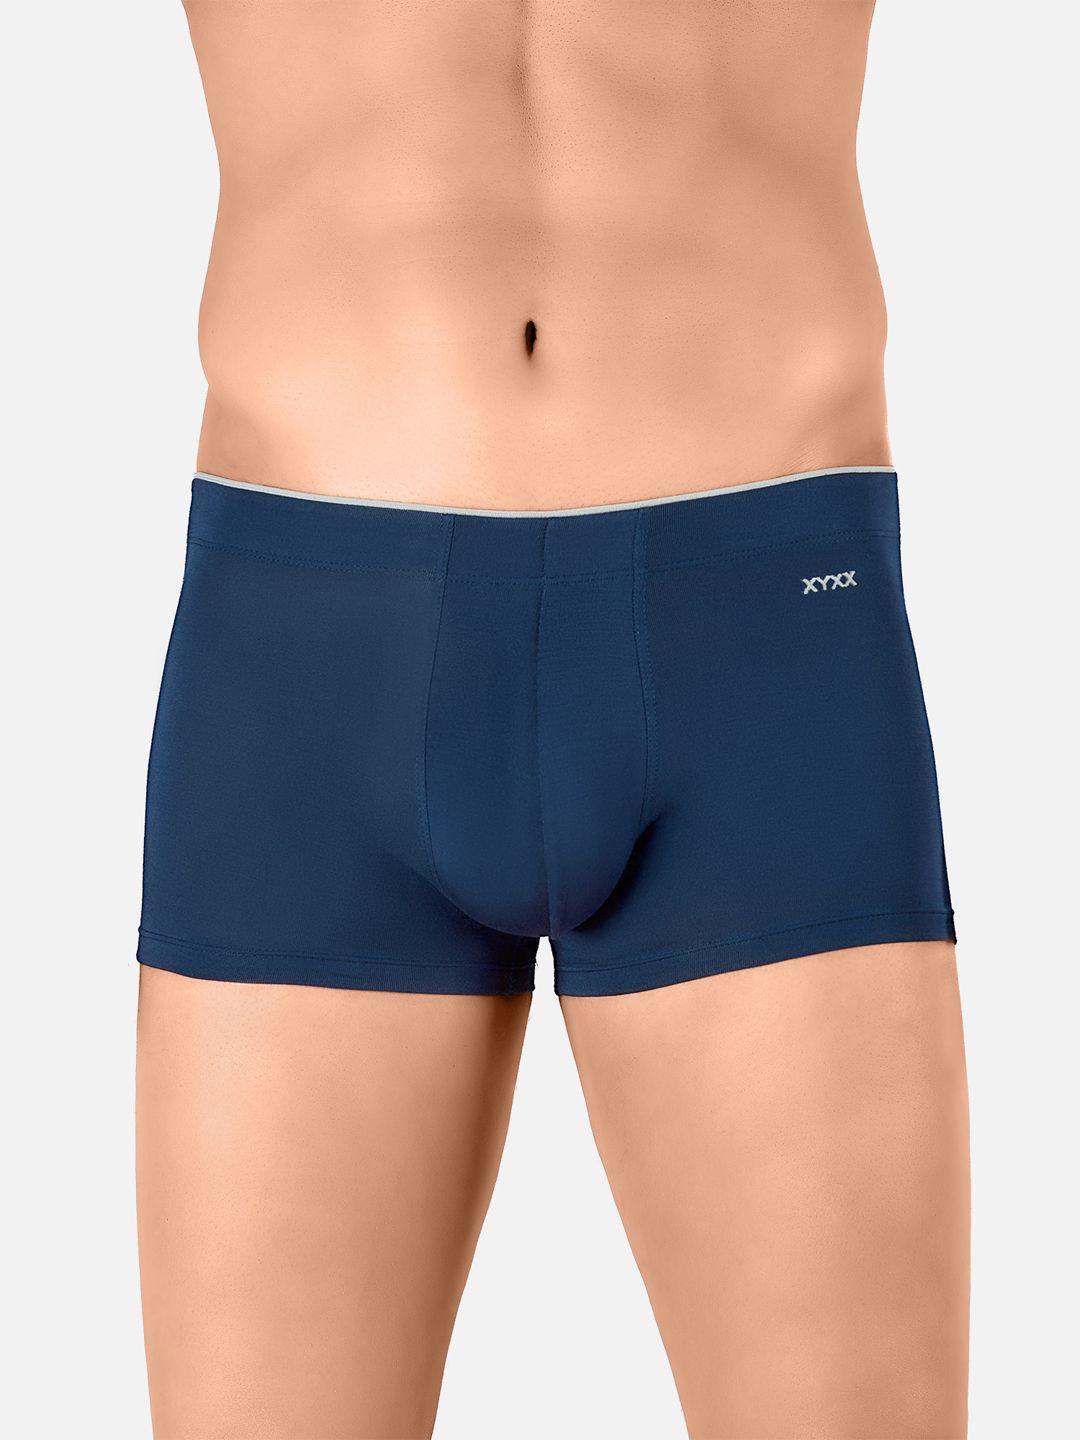 xyxx men navy blue solid ultra soft antimicrobial micro modal trunks xytrnk52